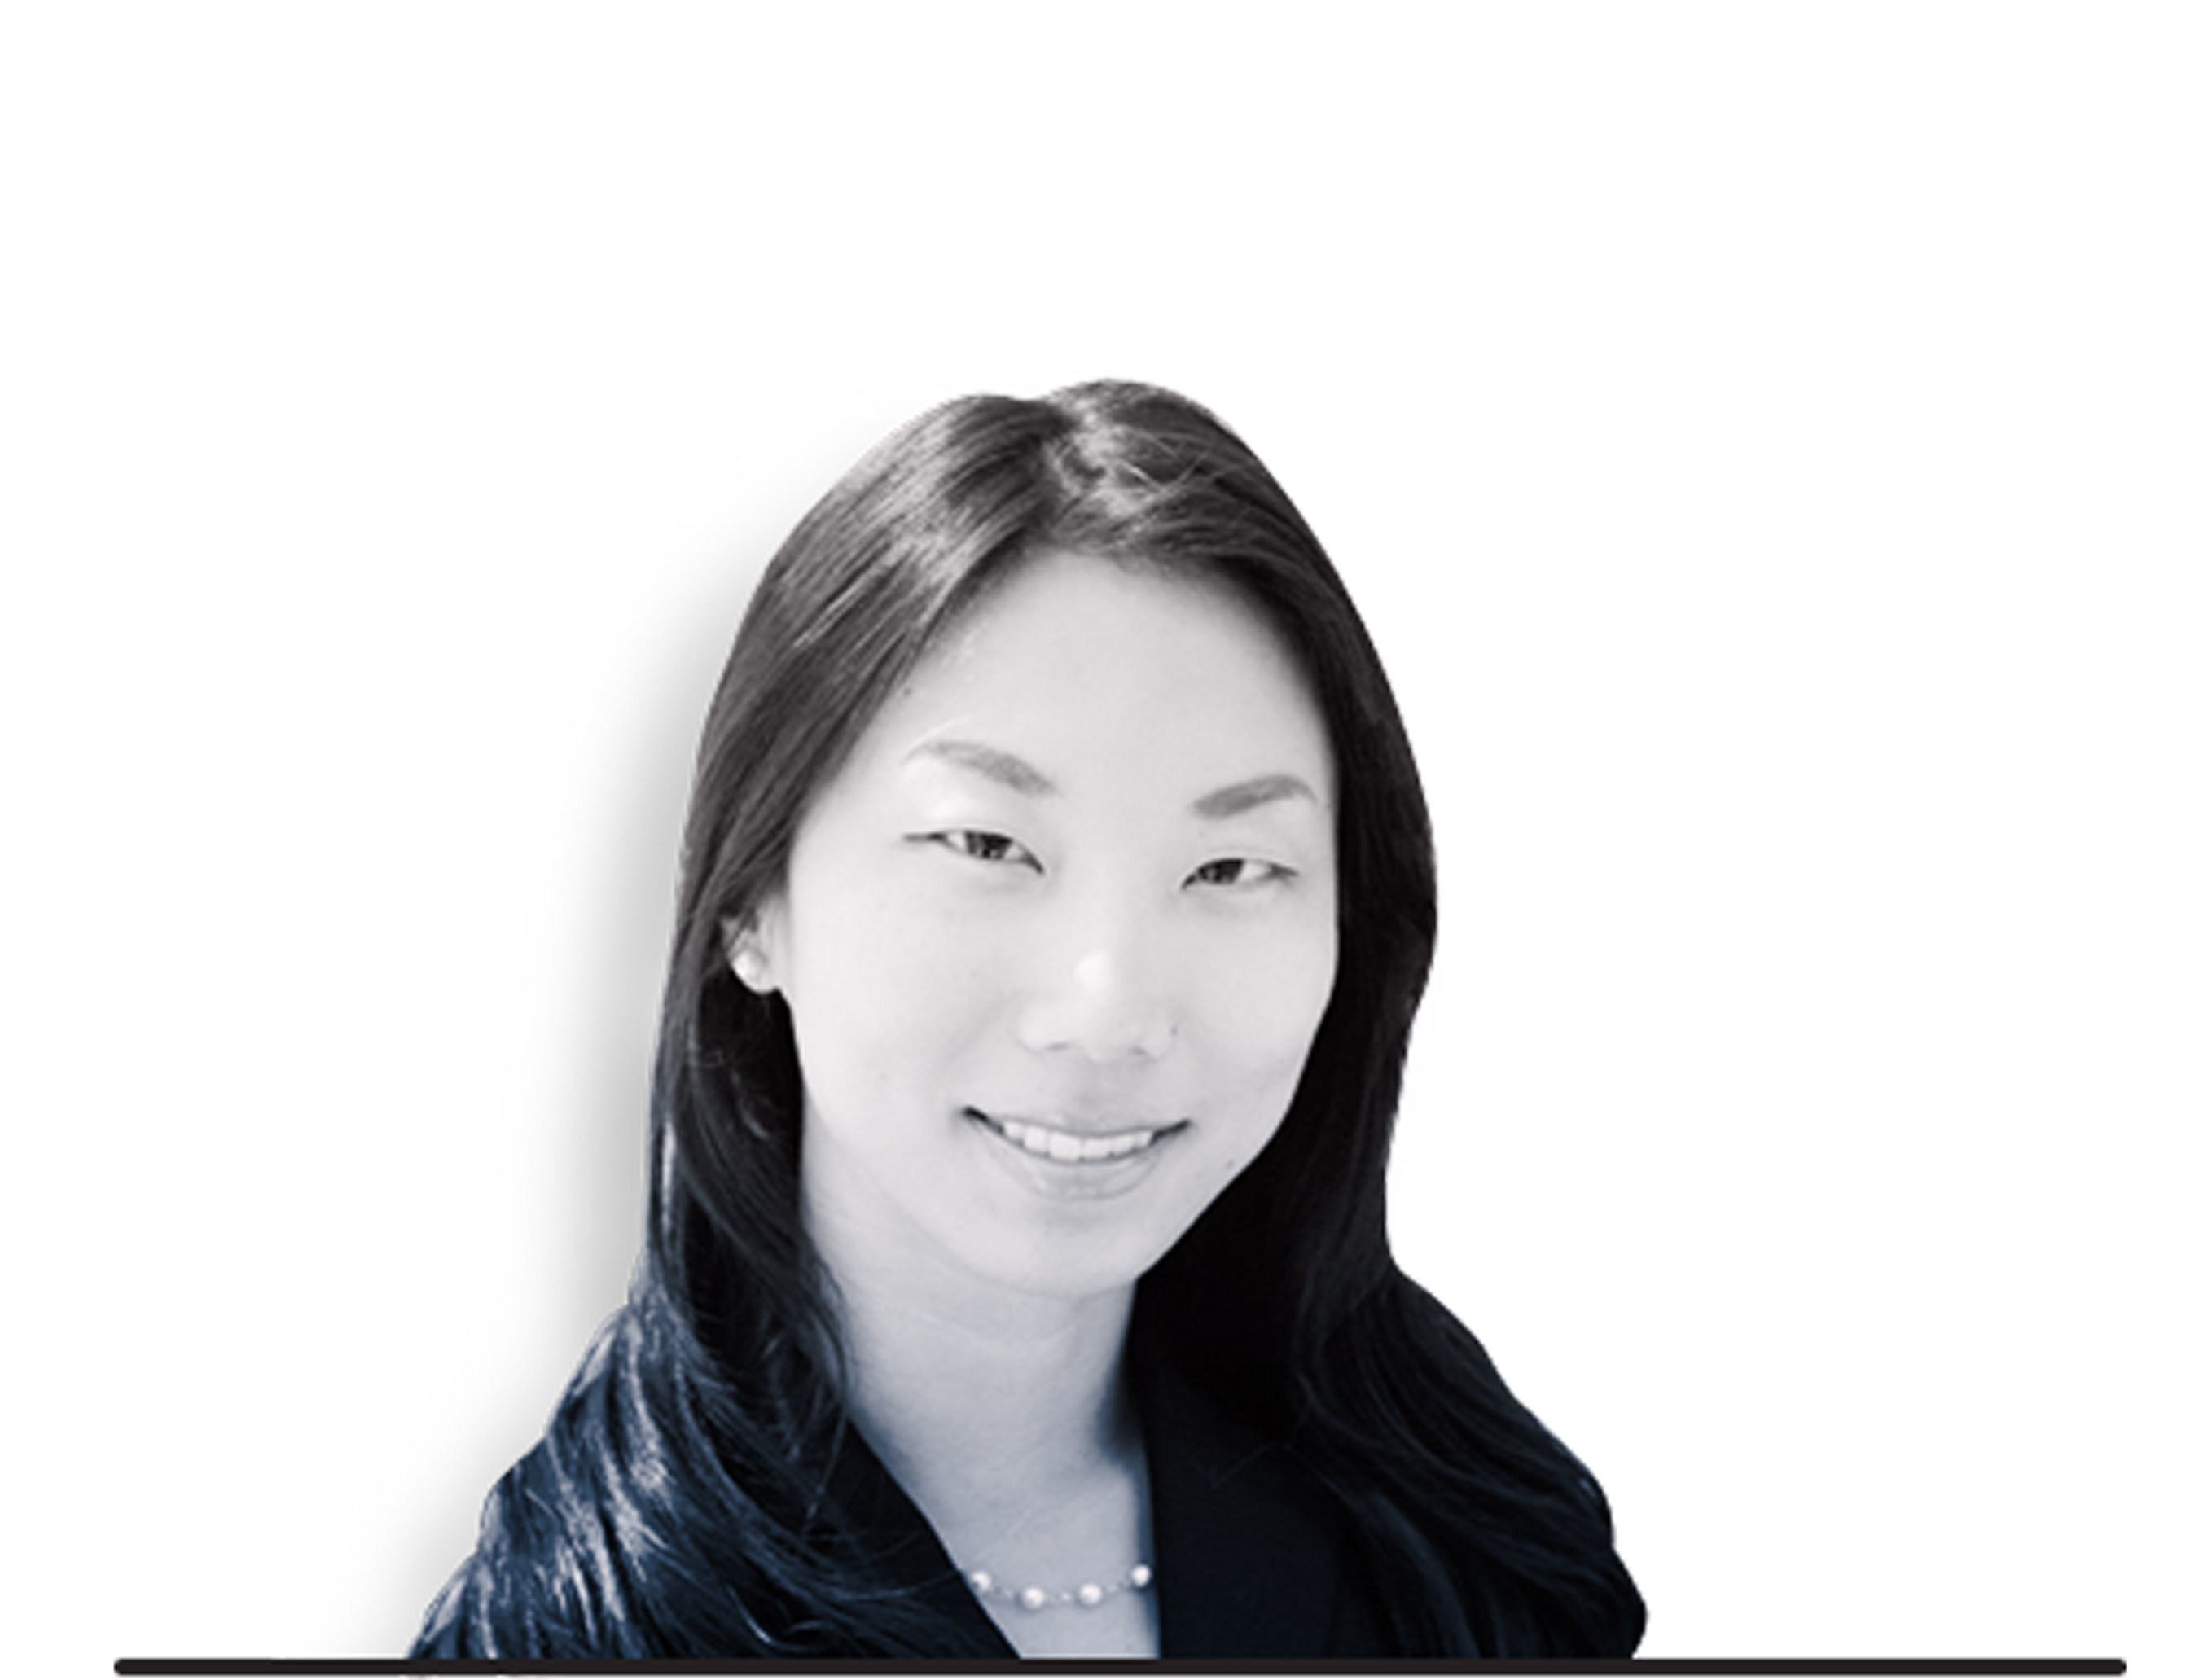 Mindspark Interactive Network's head of consumer products, Michelle Lee, and one of 2015's "Women Worth Watching" by Profiles in Diversity Journal